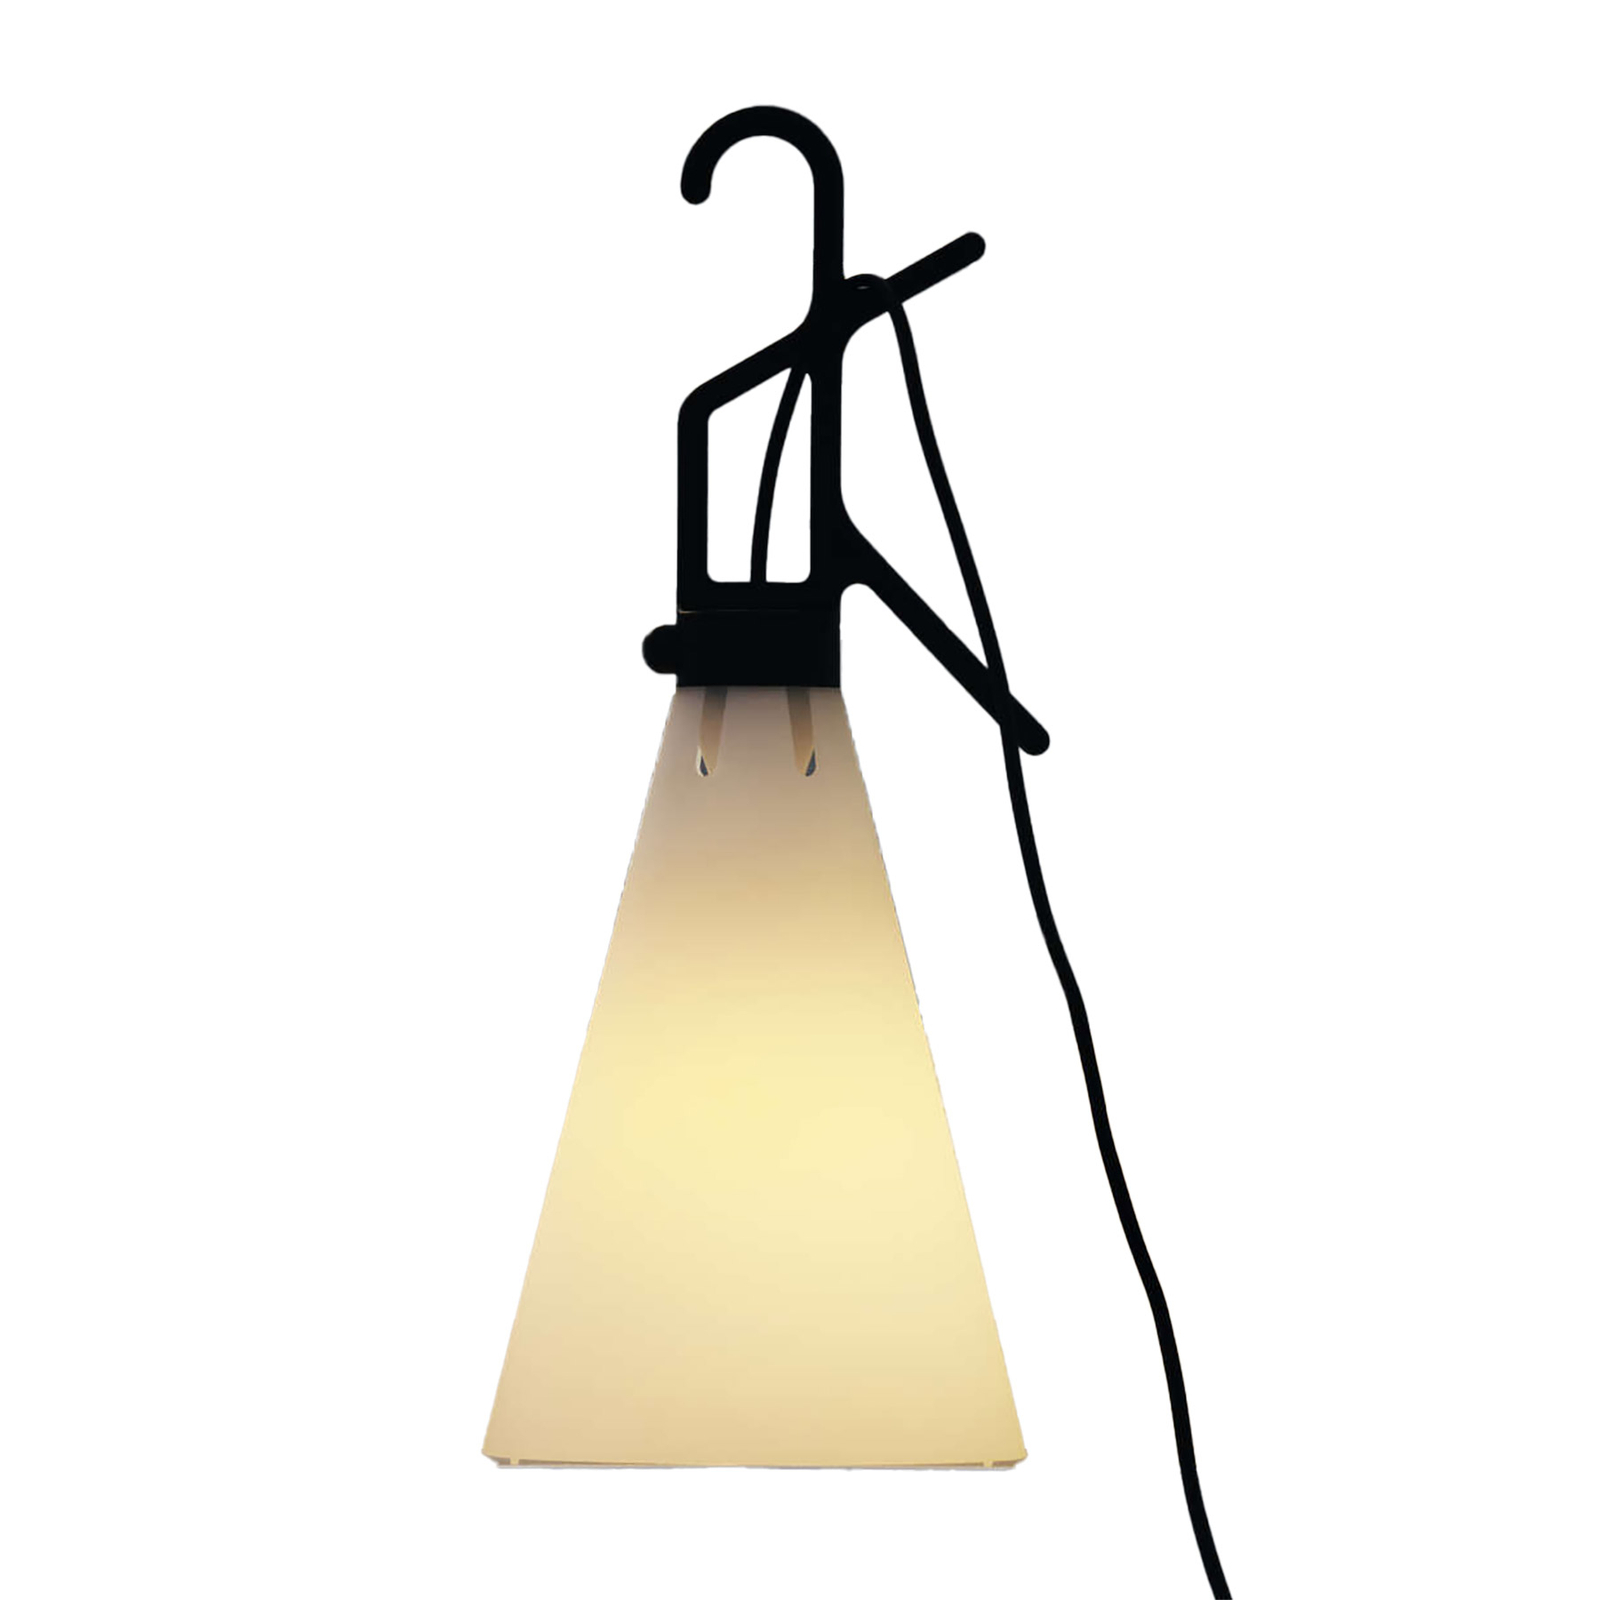 FLOS Mayday Outdoor lampe universelle noire